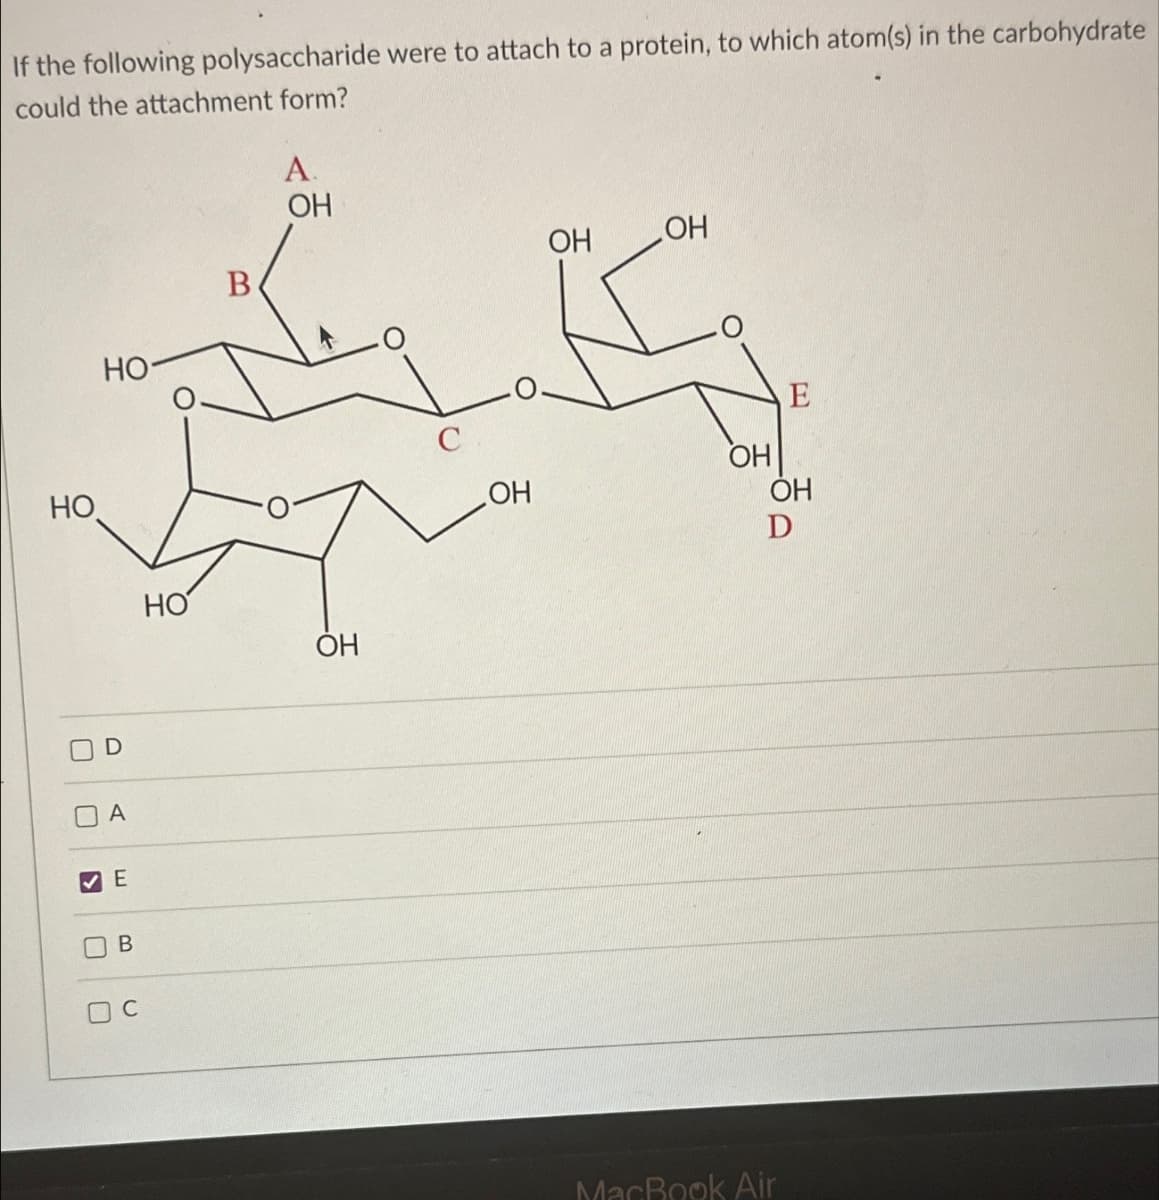 If the following polysaccharide were to attach to a protein, to which atom(s) in the carbohydrate
could the attachment form?
HO
B
HO
U
☐
D
A.
OH
OH
OH
HO
OH
A
▾ E
☐
☐
B
C
E
OH
OH
OH
D
ㅂ
MacBook Air